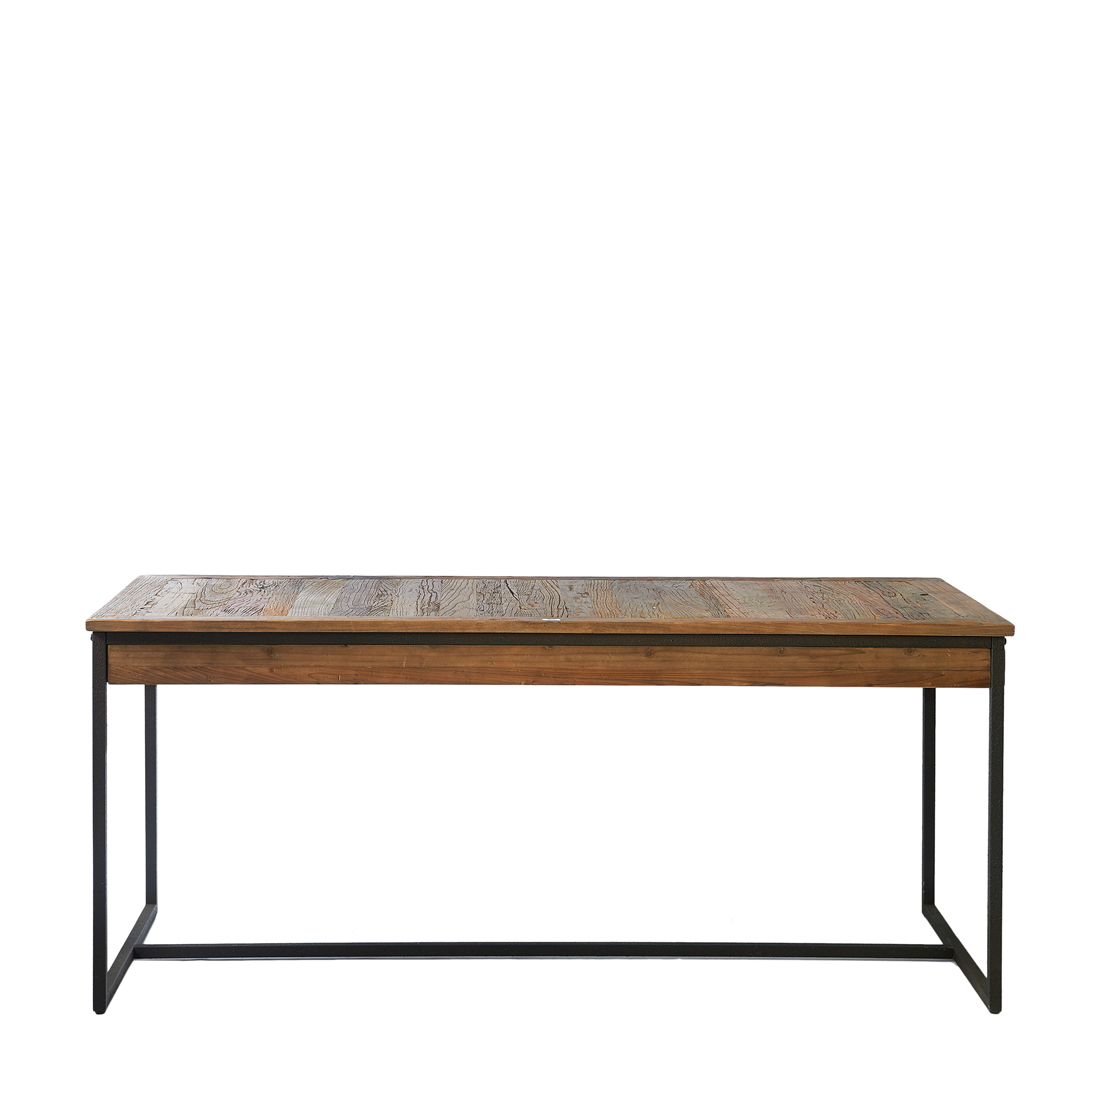 Shelter Island Dining Table, 180x90